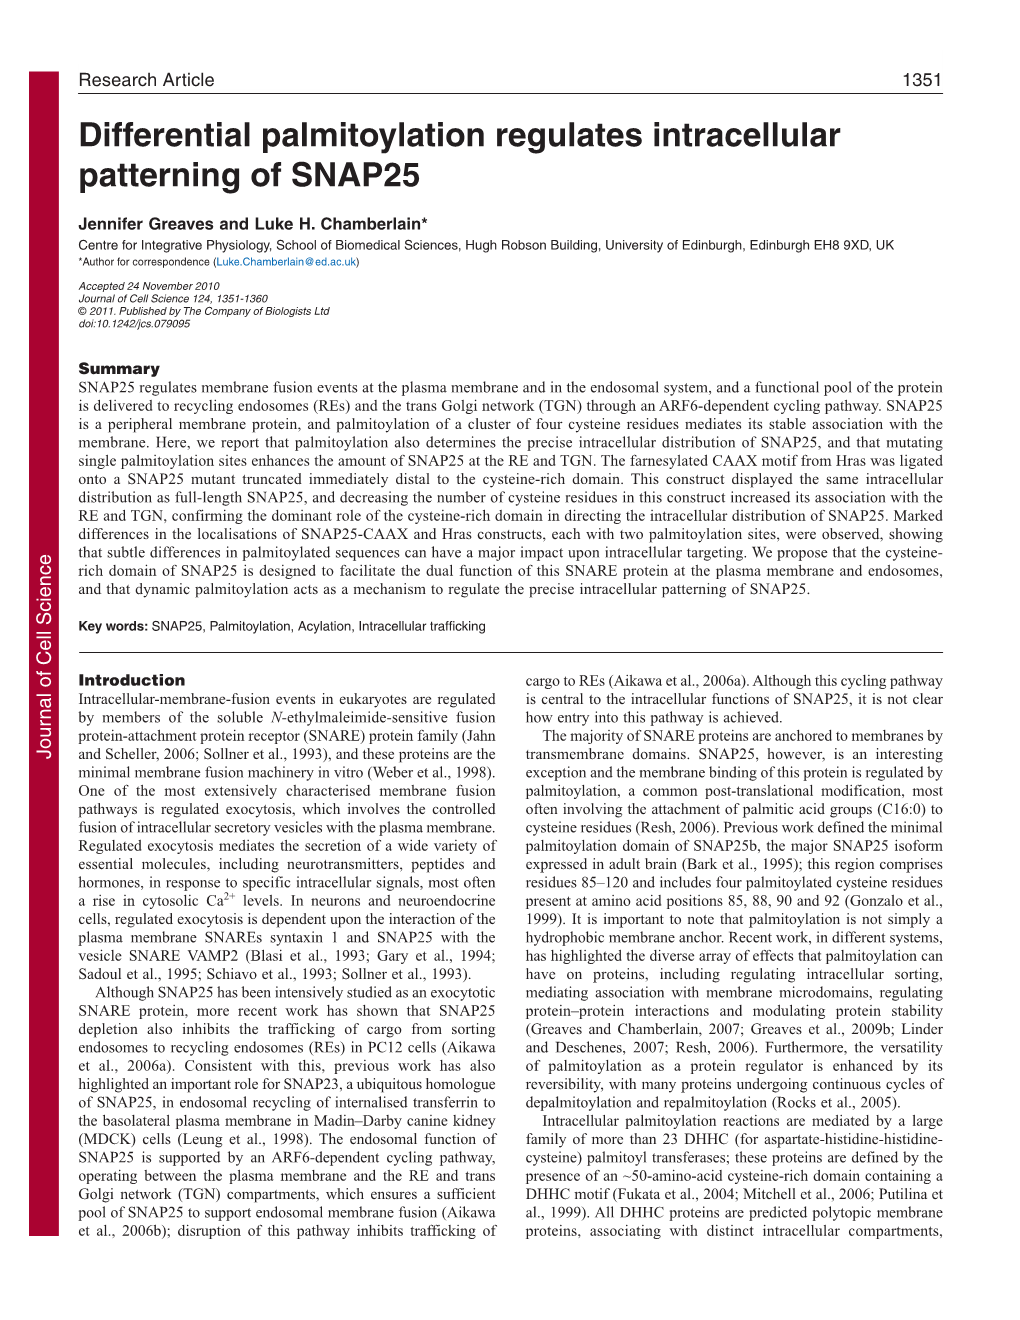 Differential Palmitoylation Regulates Intracellular Patterning of SNAP25